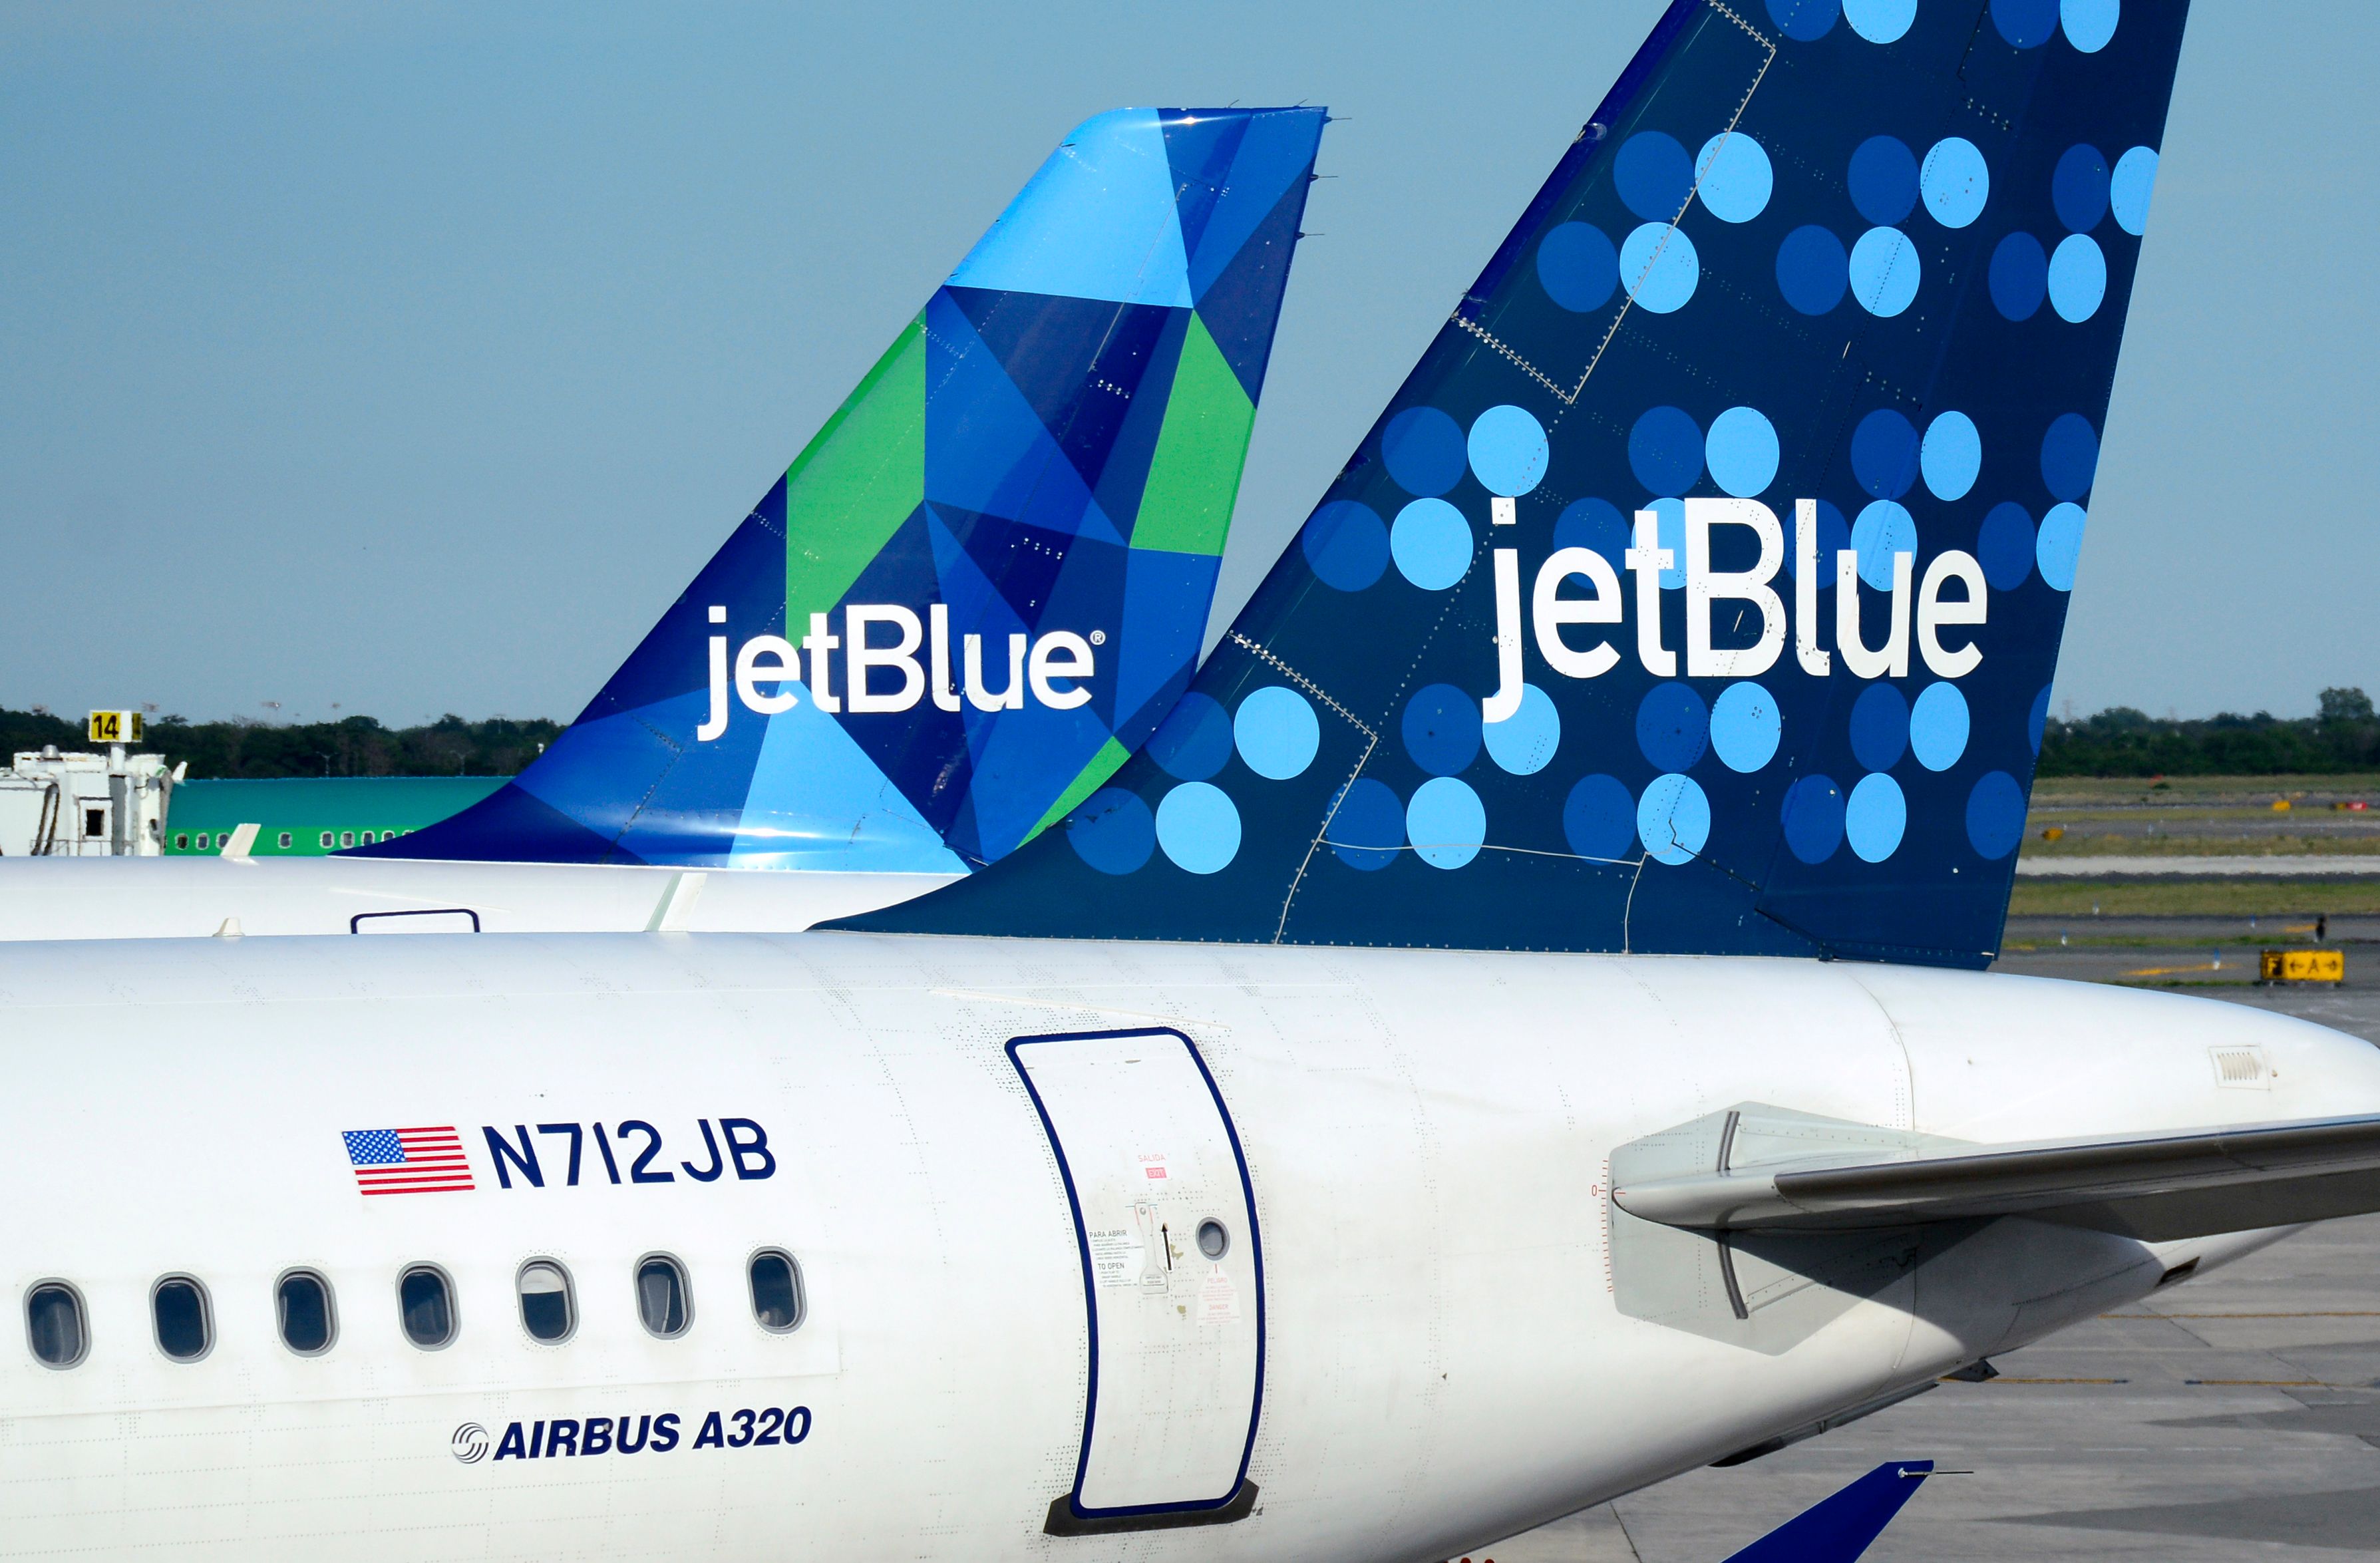 A pair of JetBlue Airways Airbus A320 passenger planes